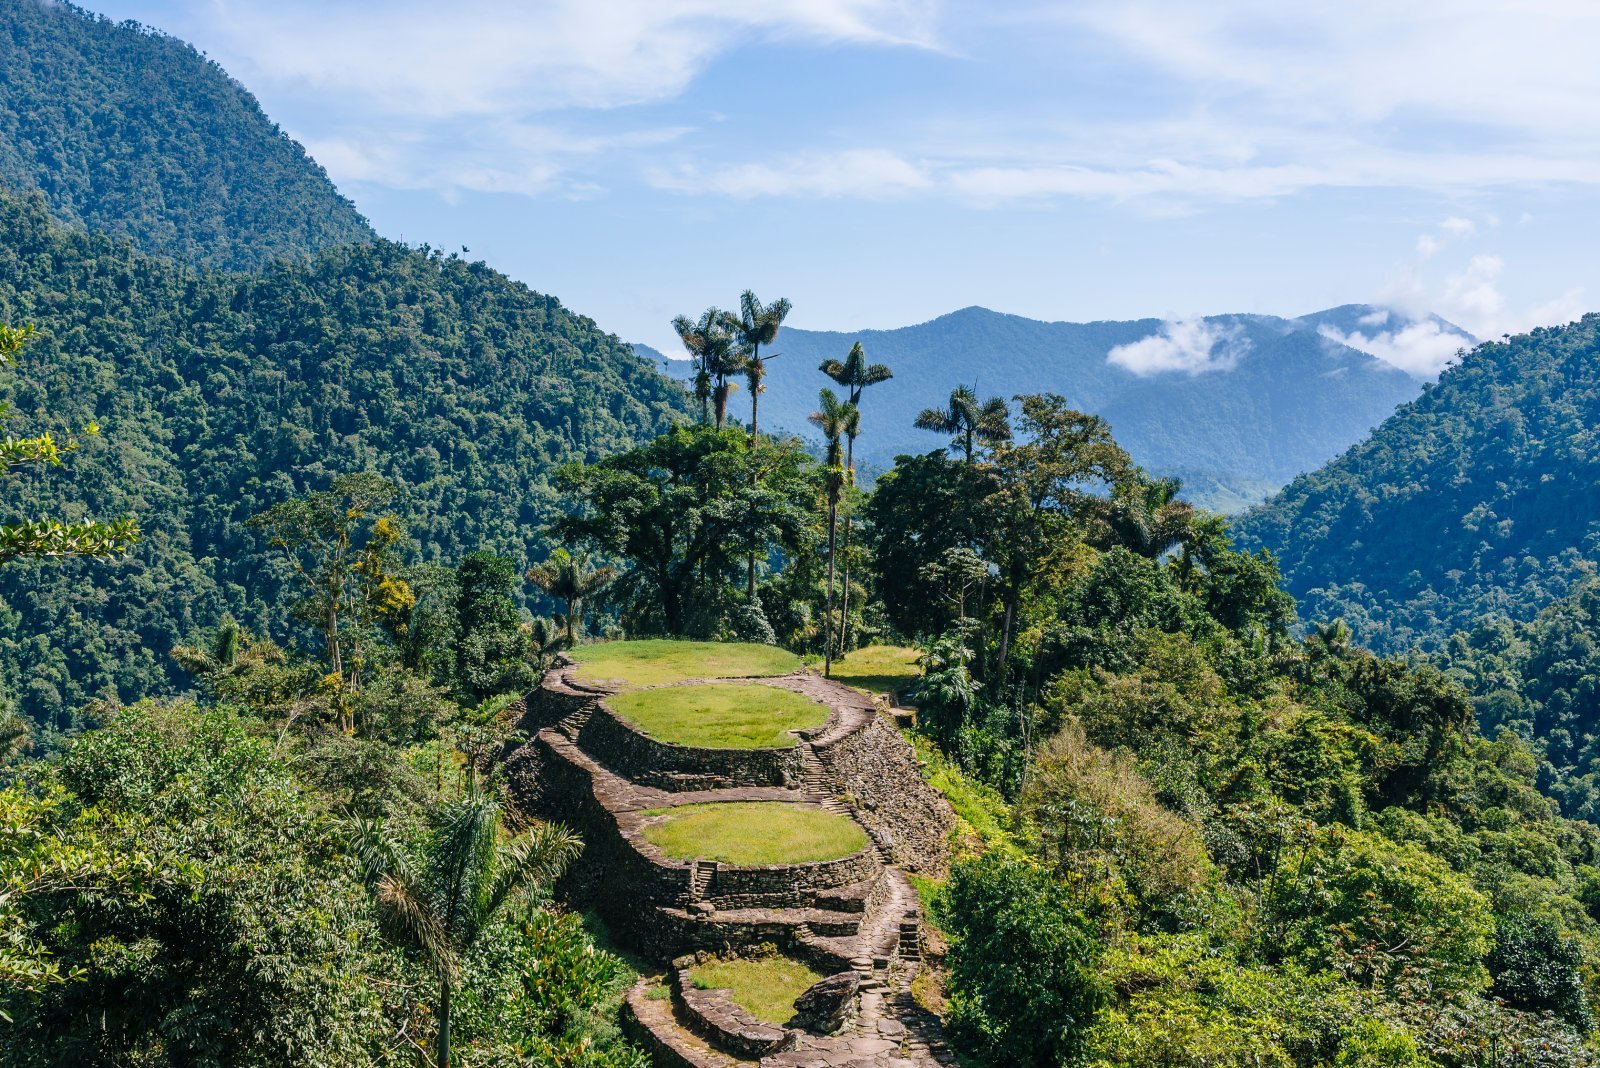 <p class="wp-caption-text">Image Credit: Shutterstock / Joerg Steber</p>  <p>Channel your inner Indiana Jones and embark on a multi-day trek to the ancient ruins of the Lost City in Colombia. Navigate dense rainforest, cross rushing rivers, and discover the awe-inspiring archaeological site hidden deep in the Sierra Nevada mountains.</p>